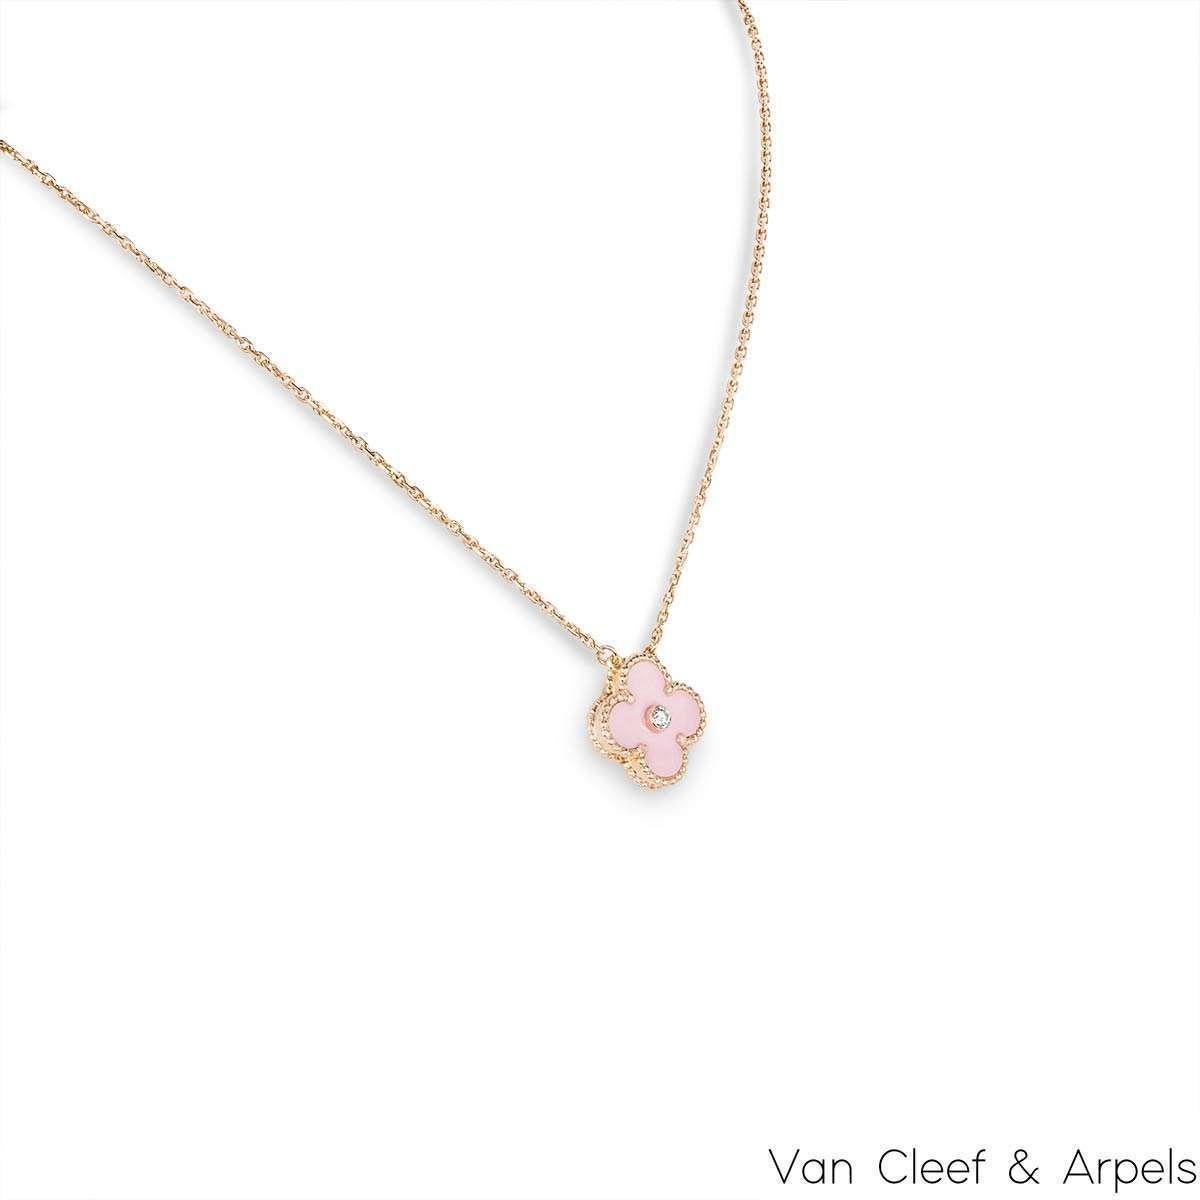 A limited edition 18k rose gold pink porcelain and diamond Van Cleef & Arpels Vintage Alhambra pendant from the 2015 Holiday collection. The pendant features a beaded edge 4-leaf clover motif with a Pink Sèvres porcelain inlay. Van Cleef & Arpels